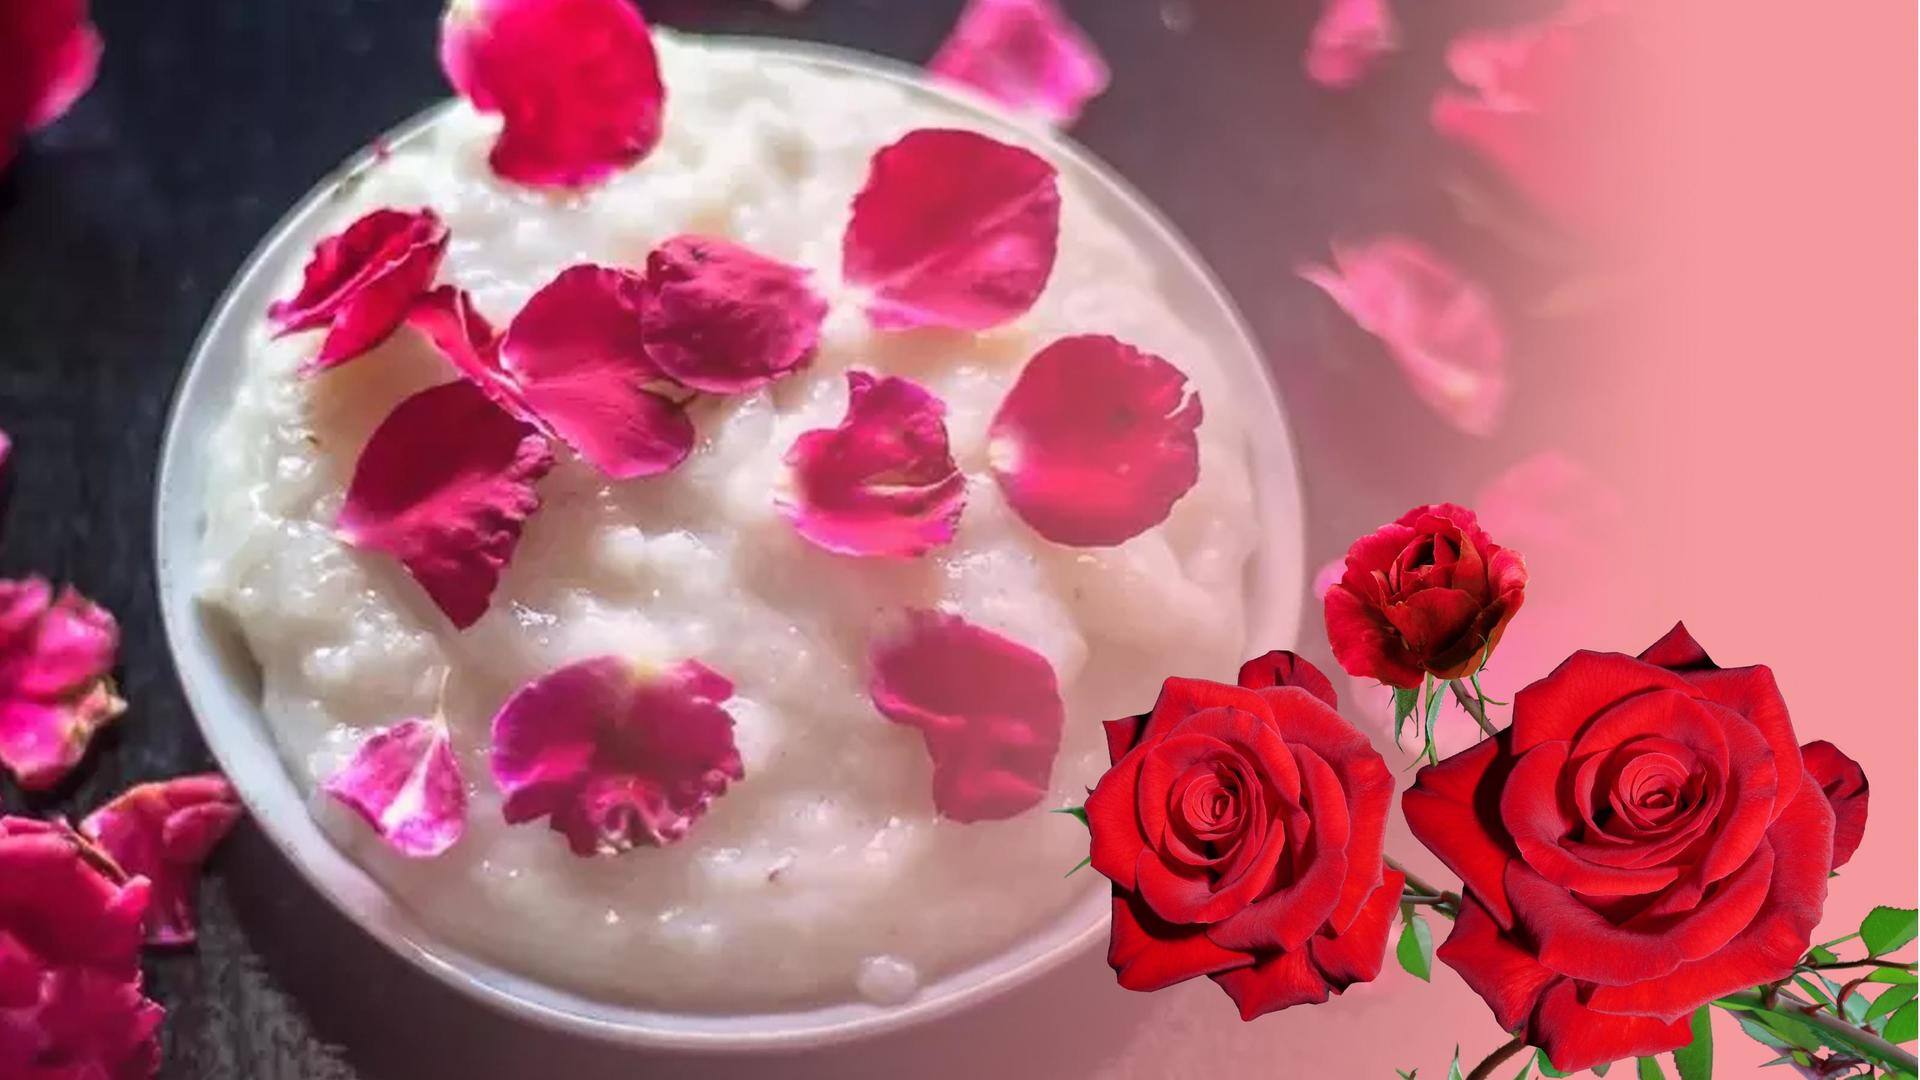 5 rose-flavored recipes you must try